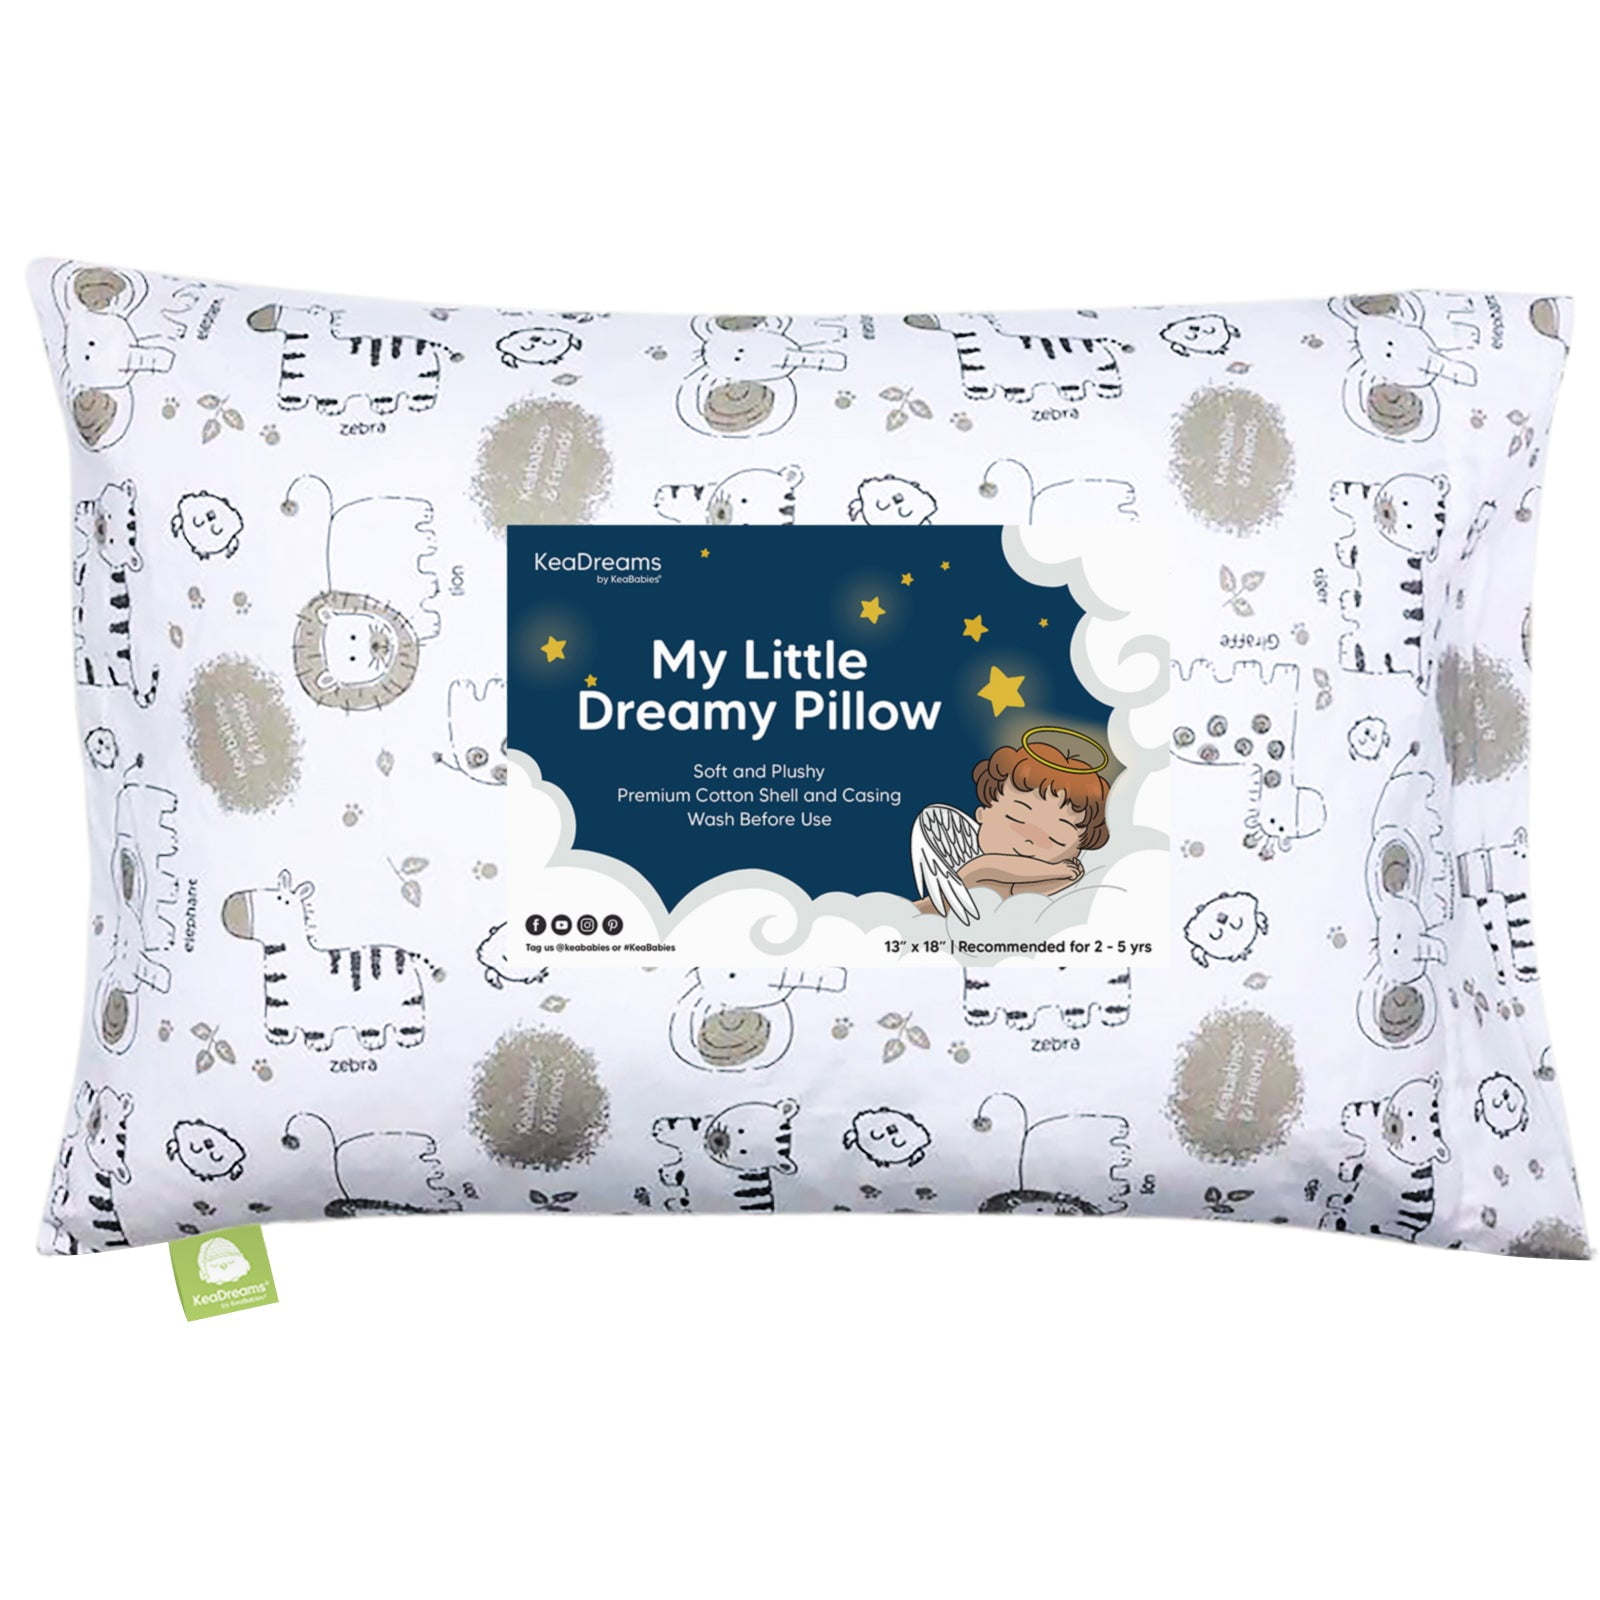 Toddler Pillowcase Small Baby Pillow Cases Cot Bed Soft Toddlers Child's Bedding 13 Cute Animals Prints Pillow Cover 2 Pack 13x18 Pillowcases Fit Kids Pillows for Sleeping Travel 100% Cotton 